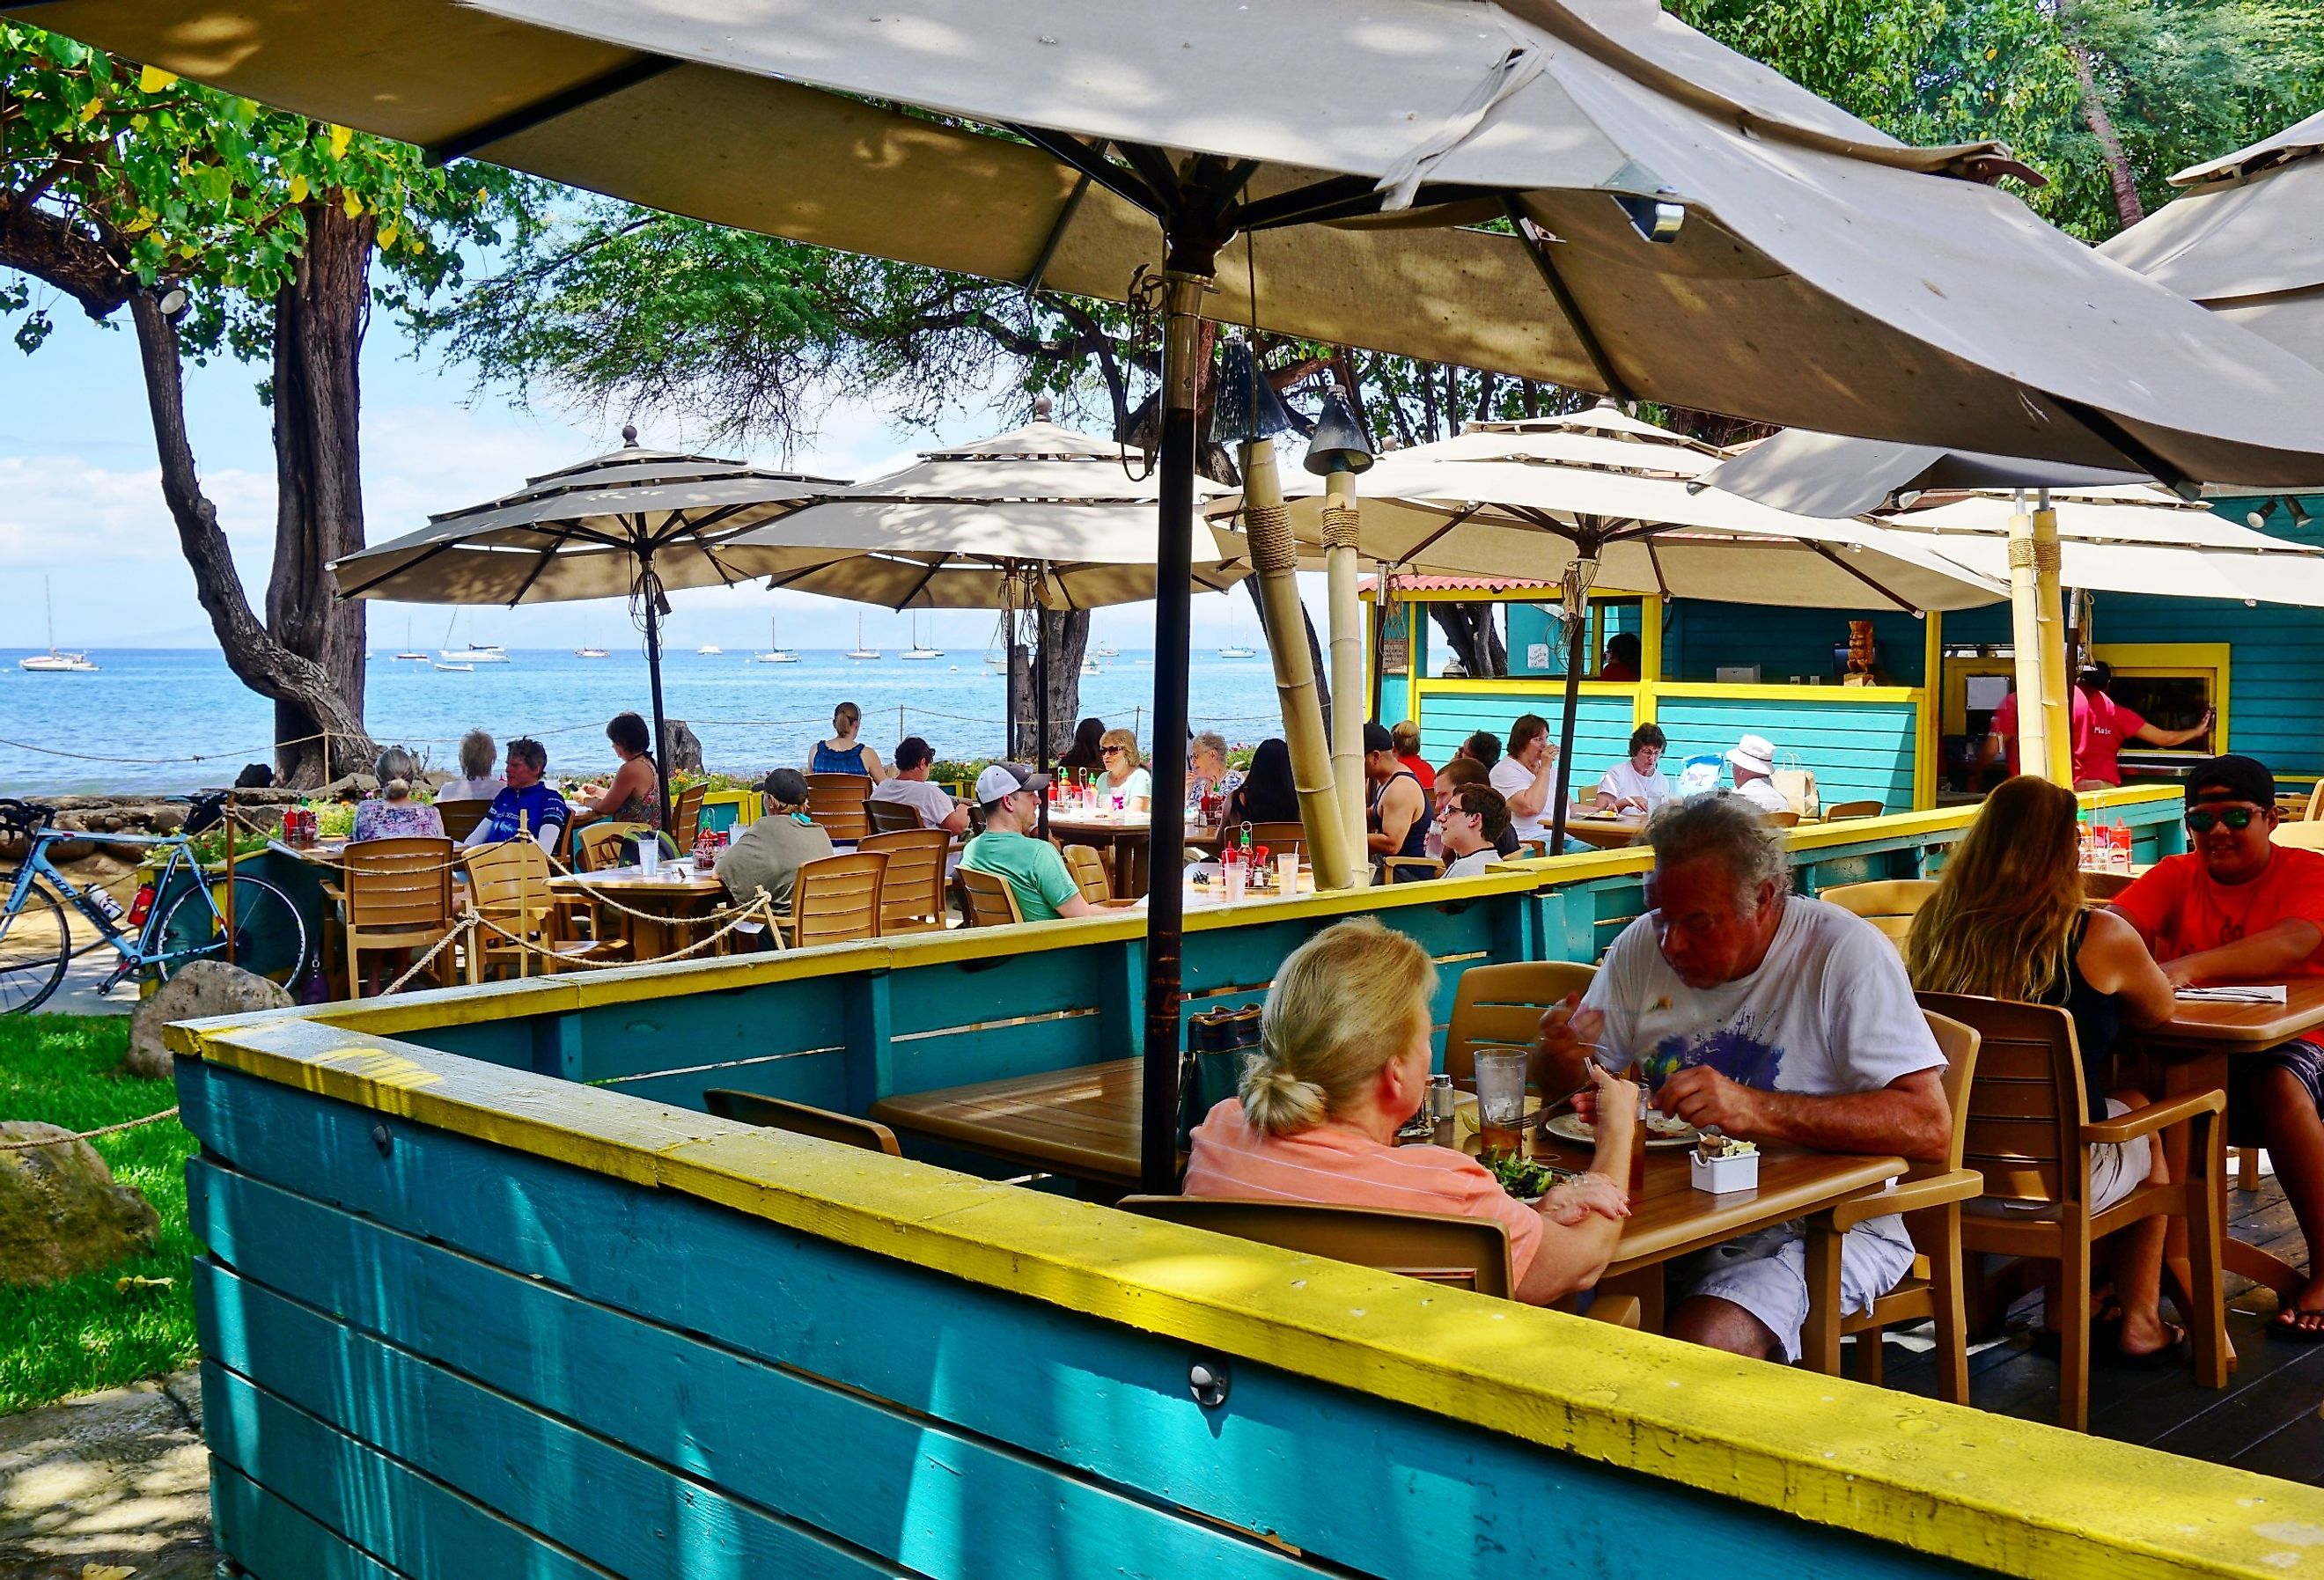 Aloha Mixed Plate is a popular beachside barbecue restaurant in Lahaina, on Maui. Image credit EQRoy via Shutterstock